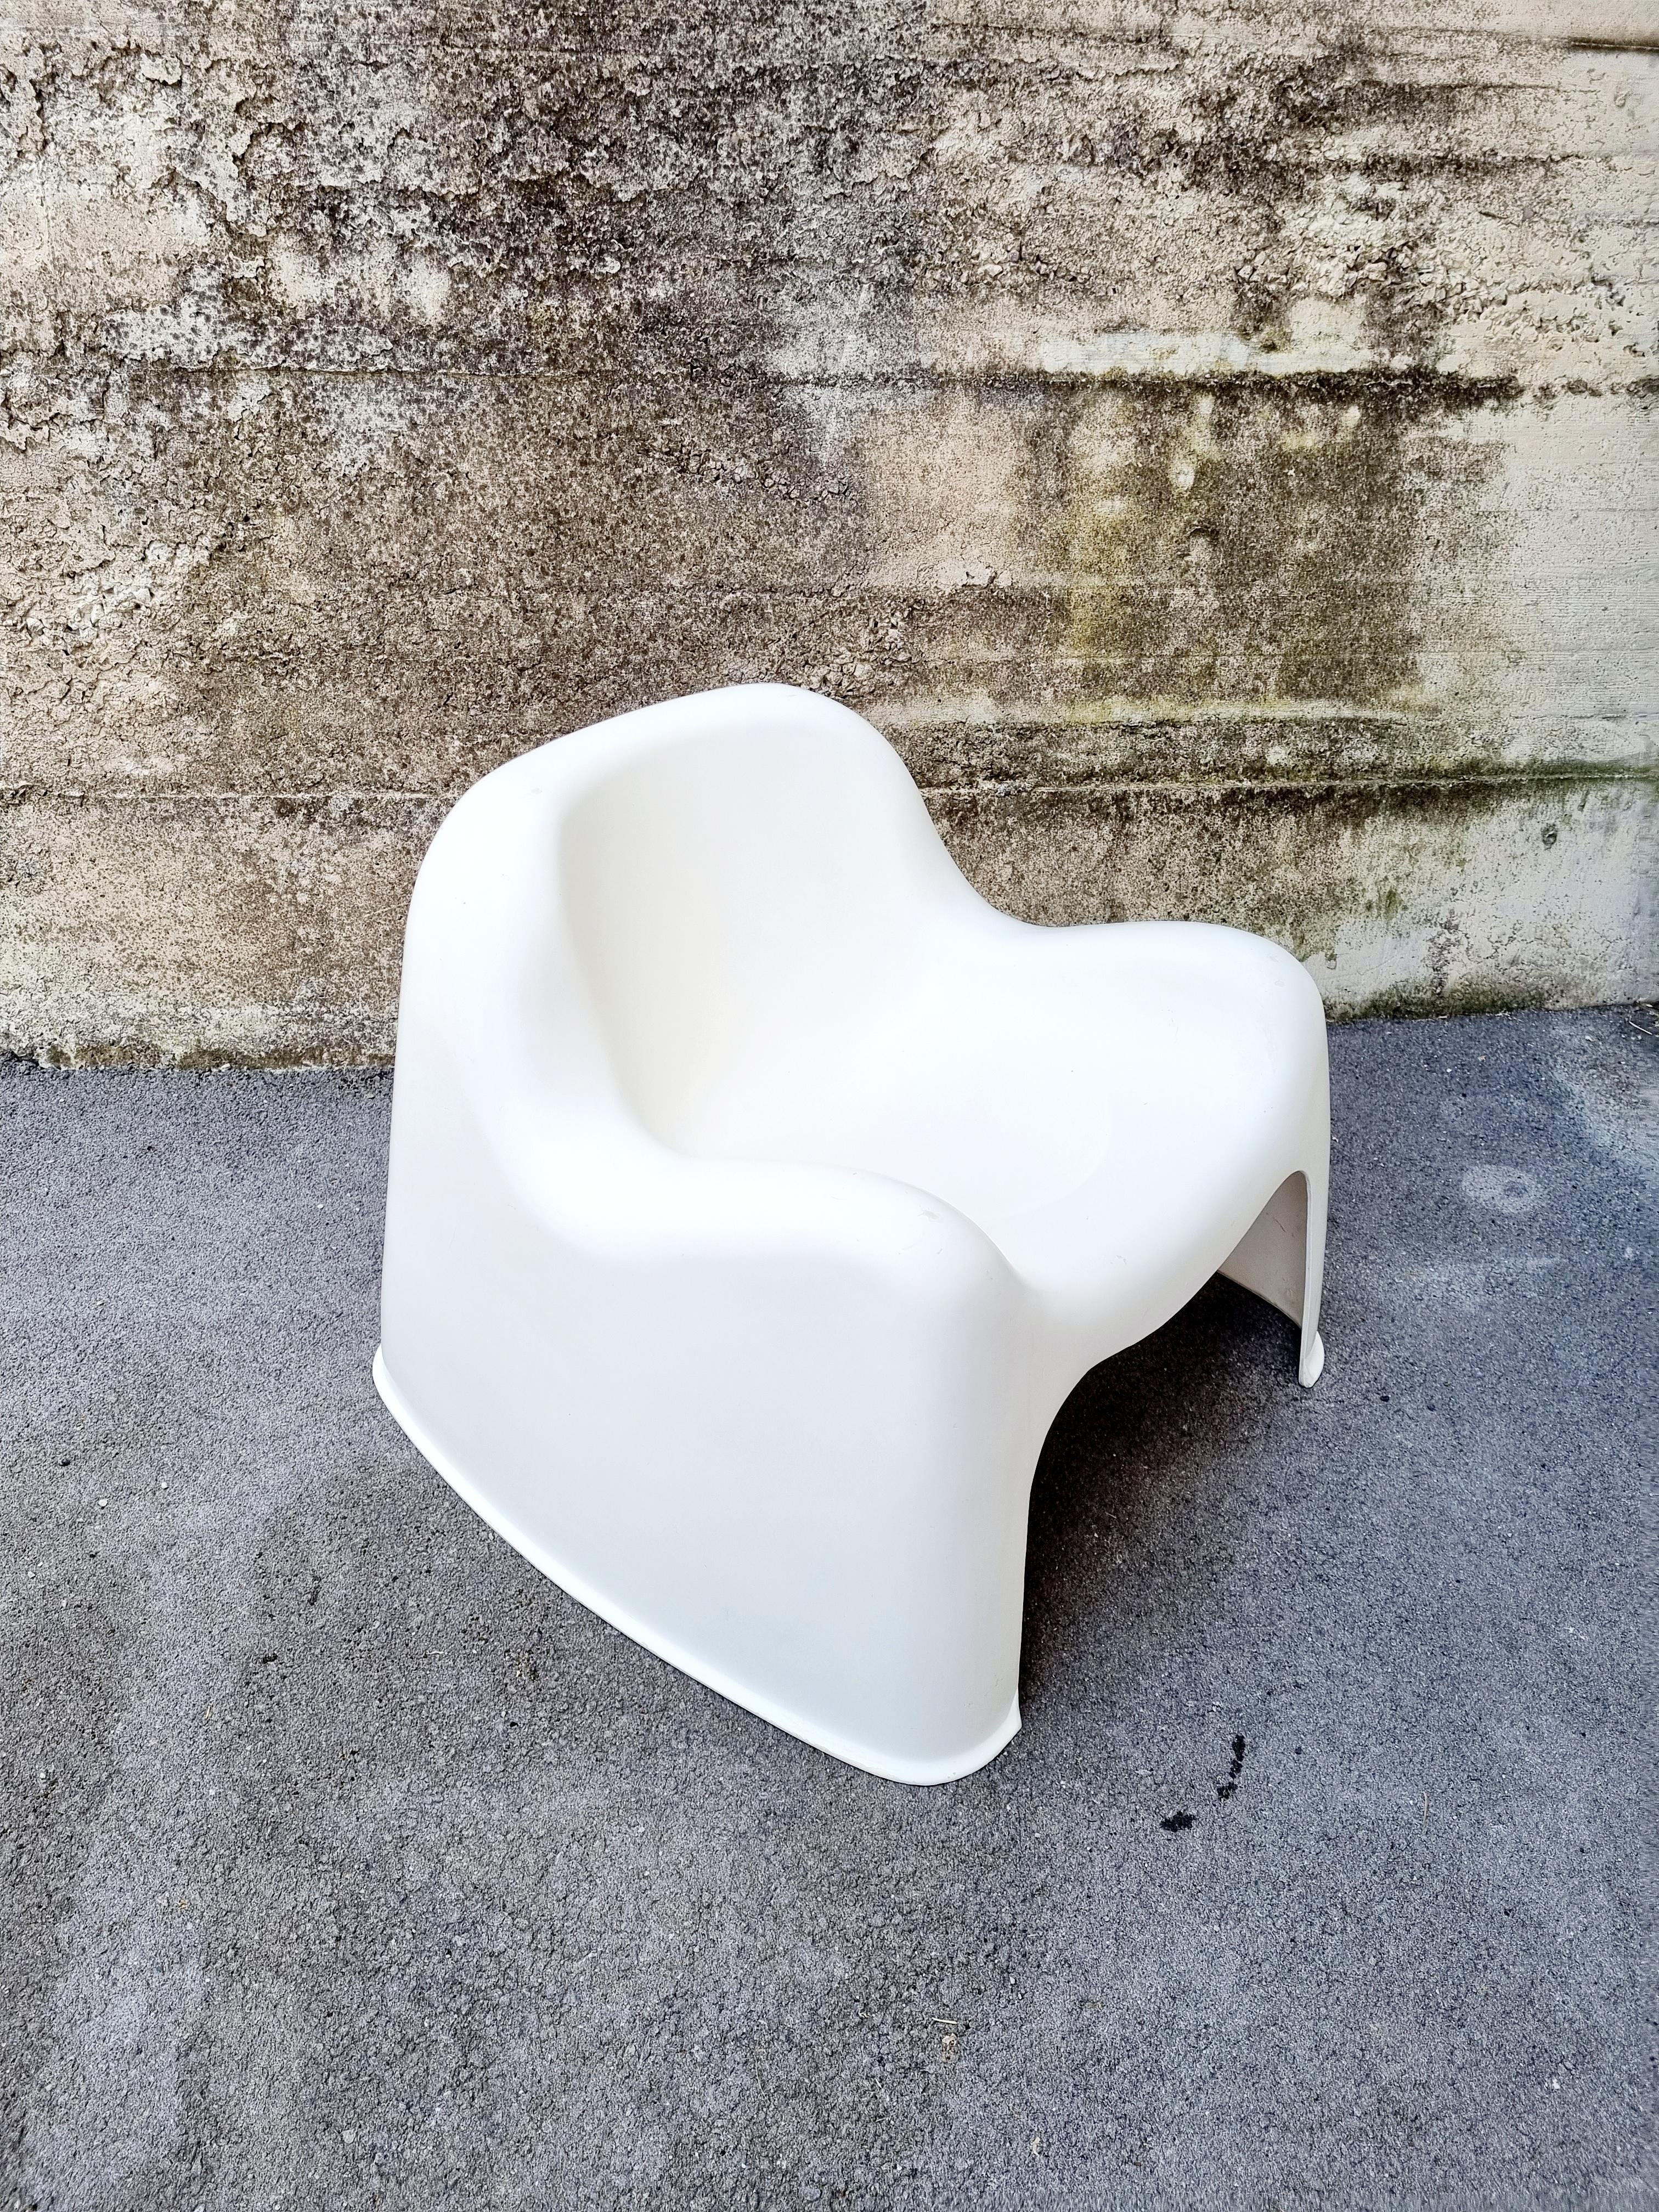 Midcentury White Toga Chair by Sergio Mazza for Artemide, Italy, 1960s For Sale 1